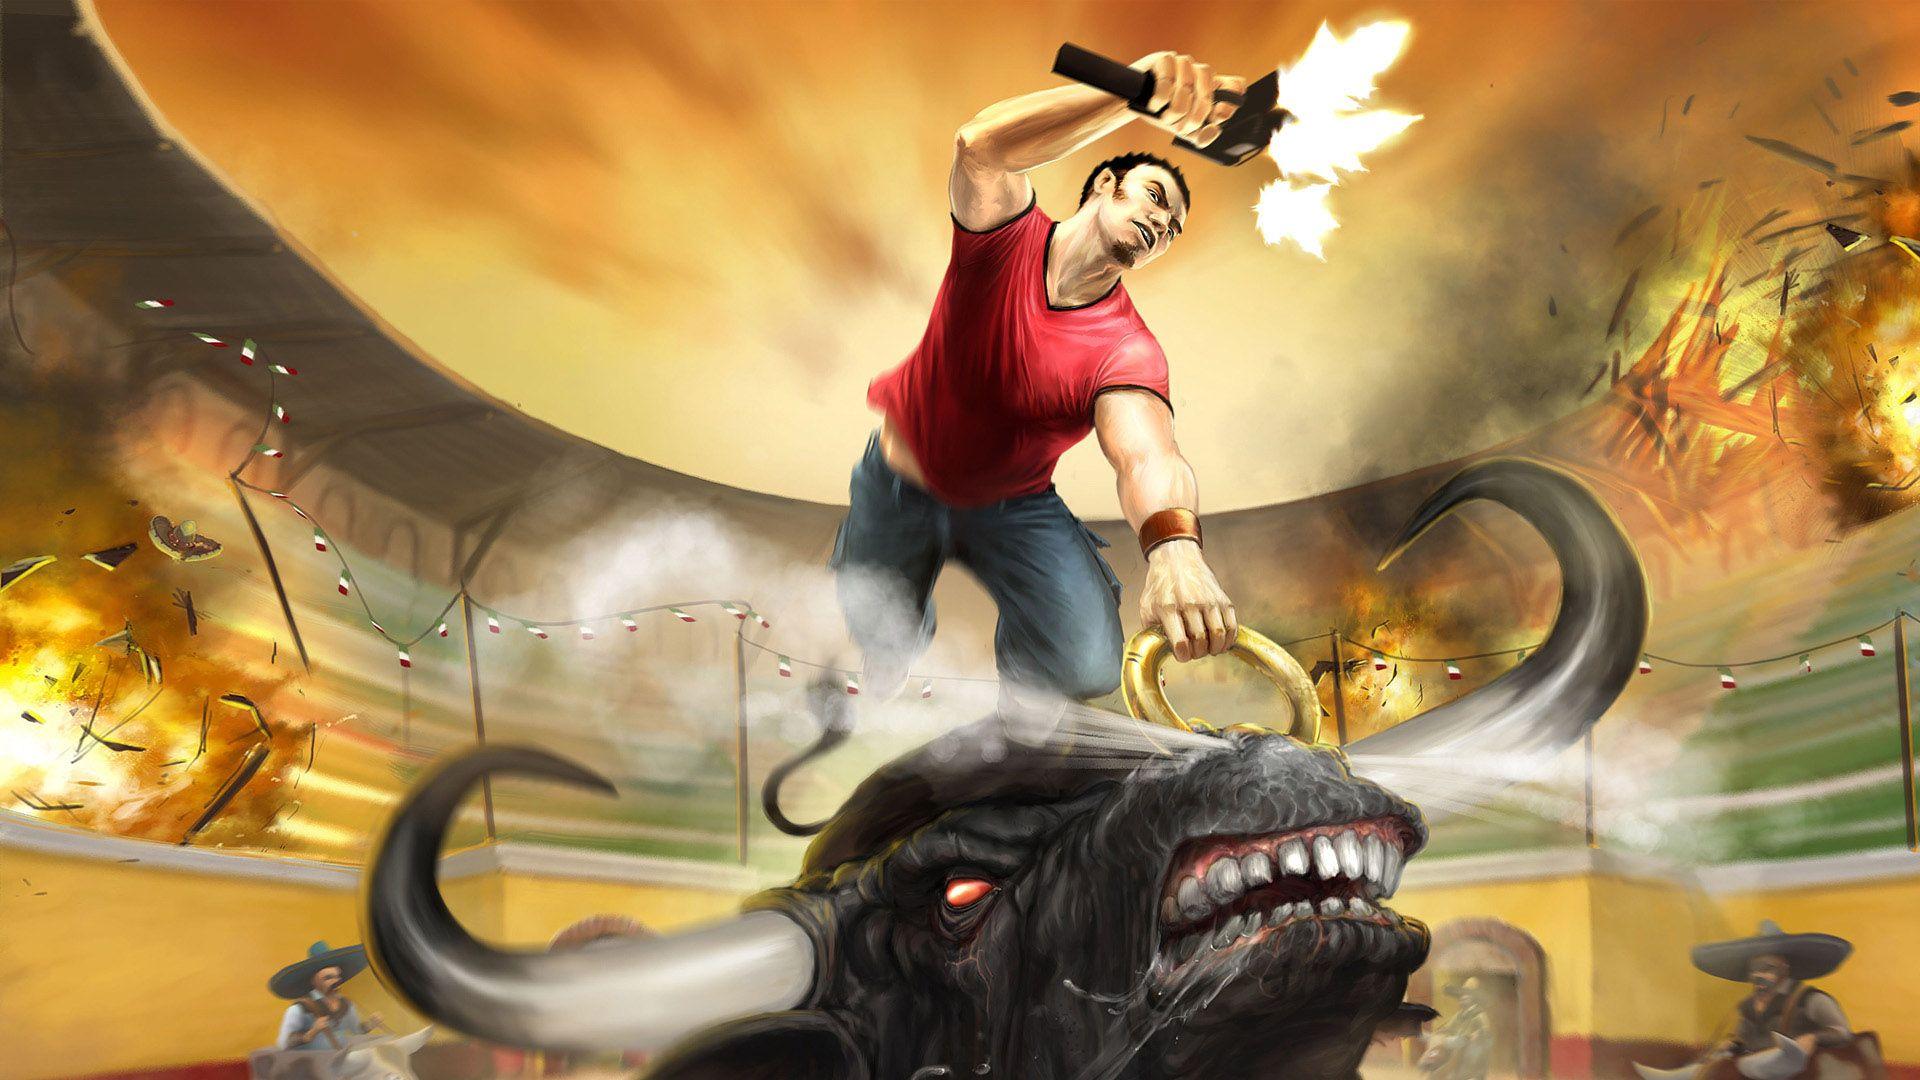 Serious Sam Full HD Wallpaper and Background Imagex1080